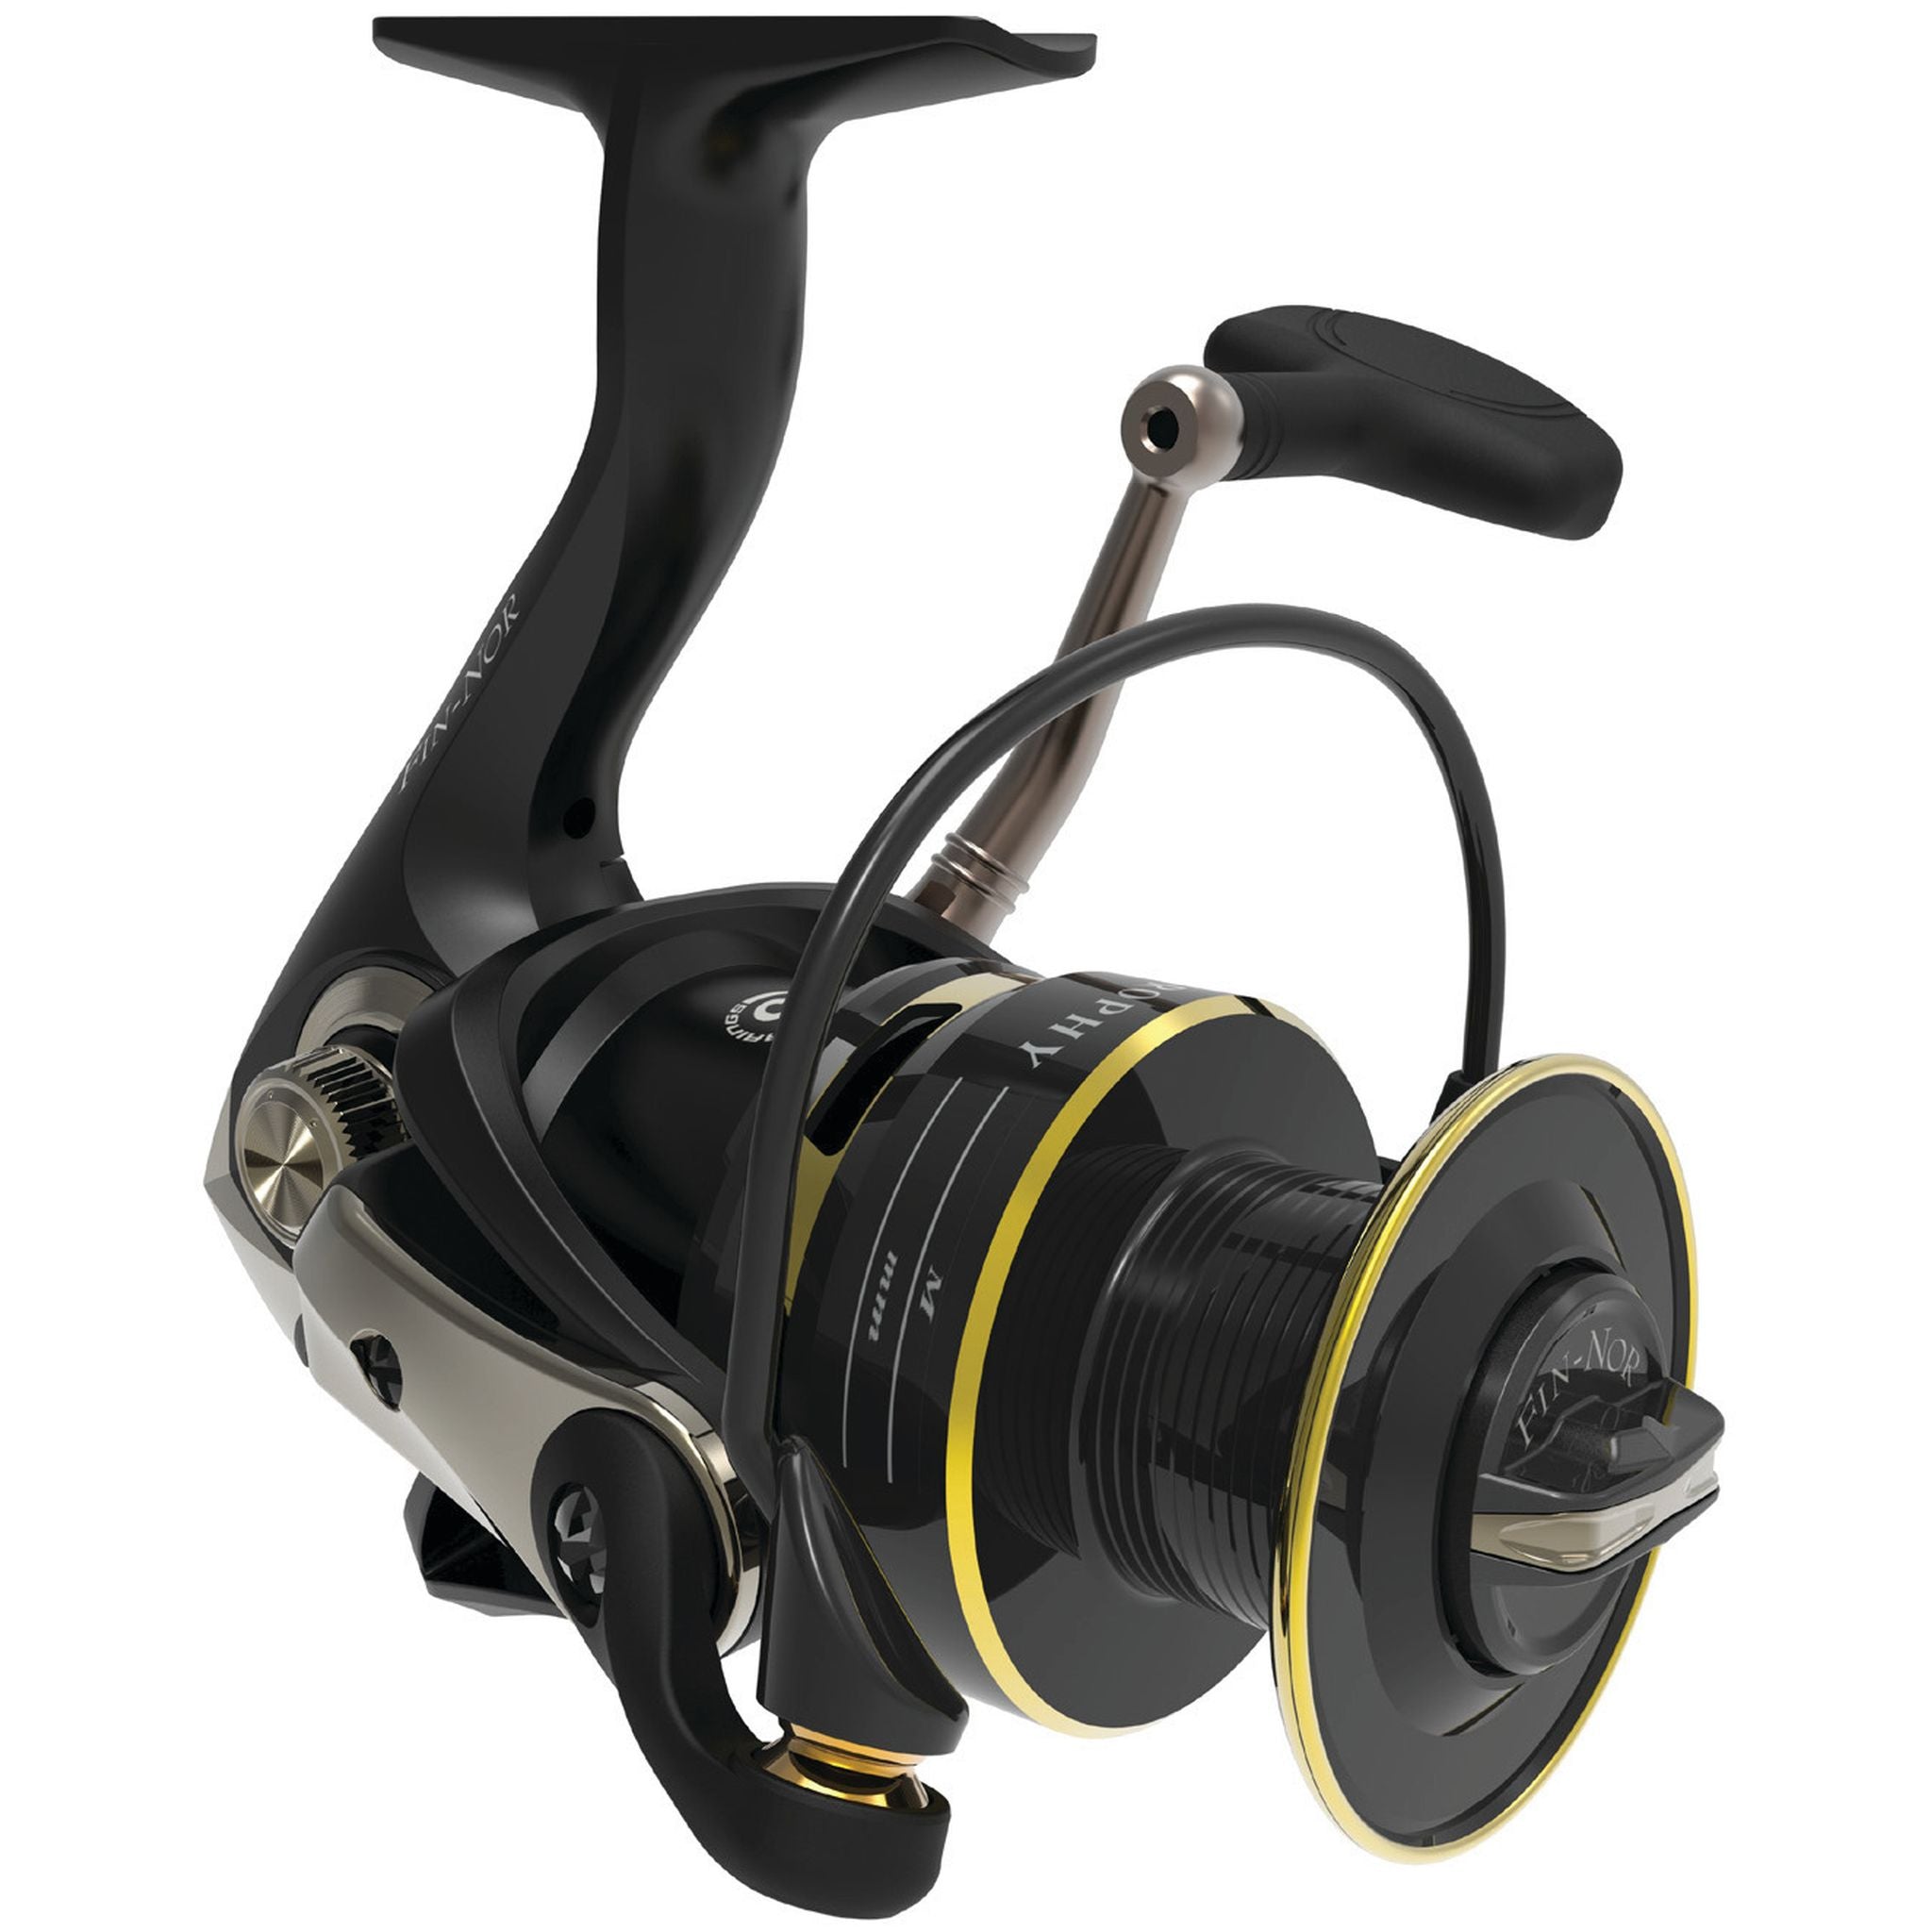 Fin-Nor Trophy TRO60 Spinning Fishing Reel